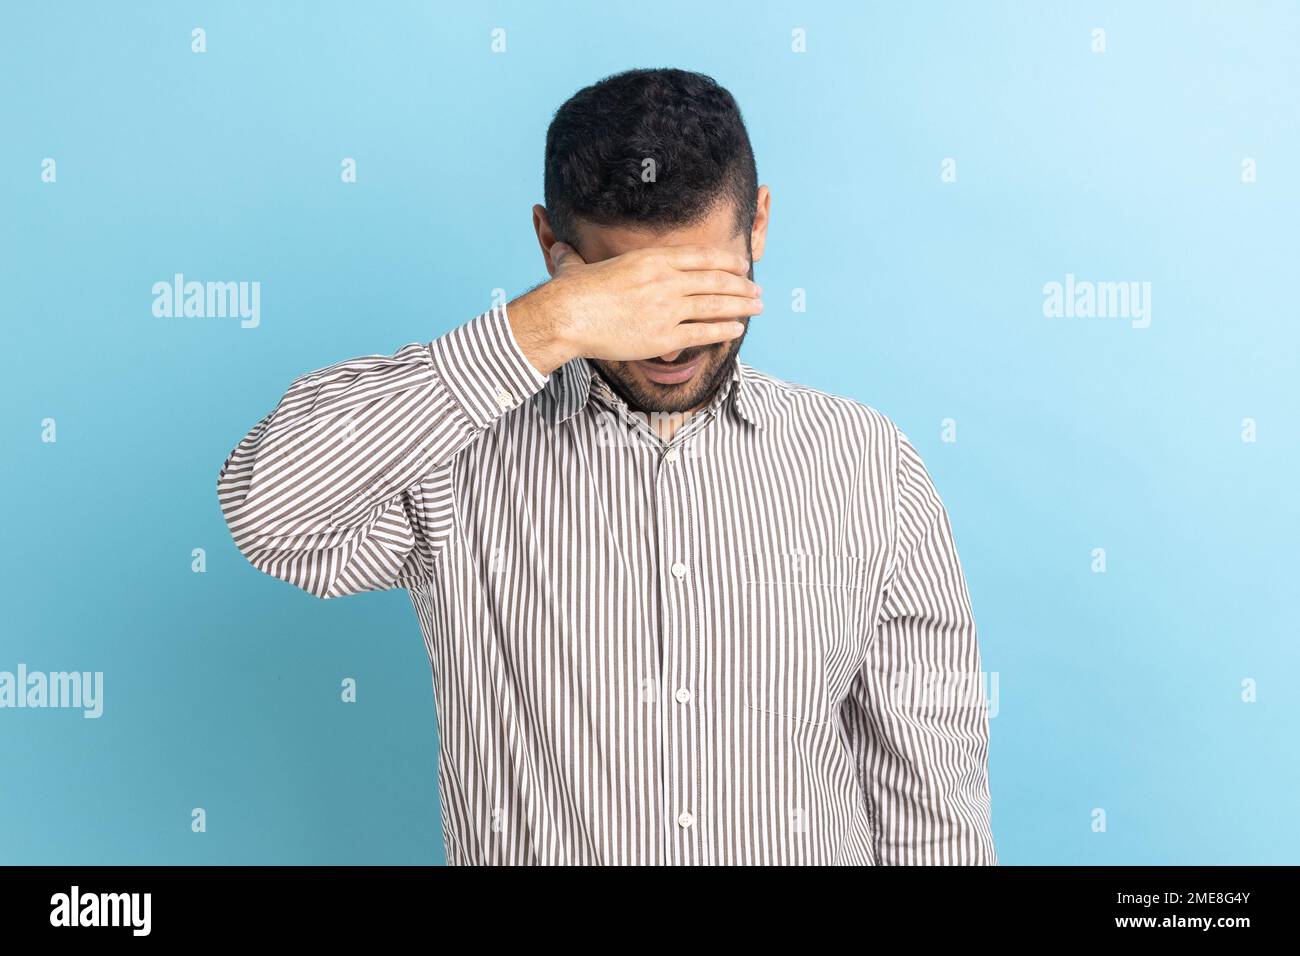 Young adult businessman closing eyes with hand, dont want to see that, ignoring problems, hiding from stressful situations, wearing striped shirt. Indoor studio shot isolated on blue background. Stock Photo